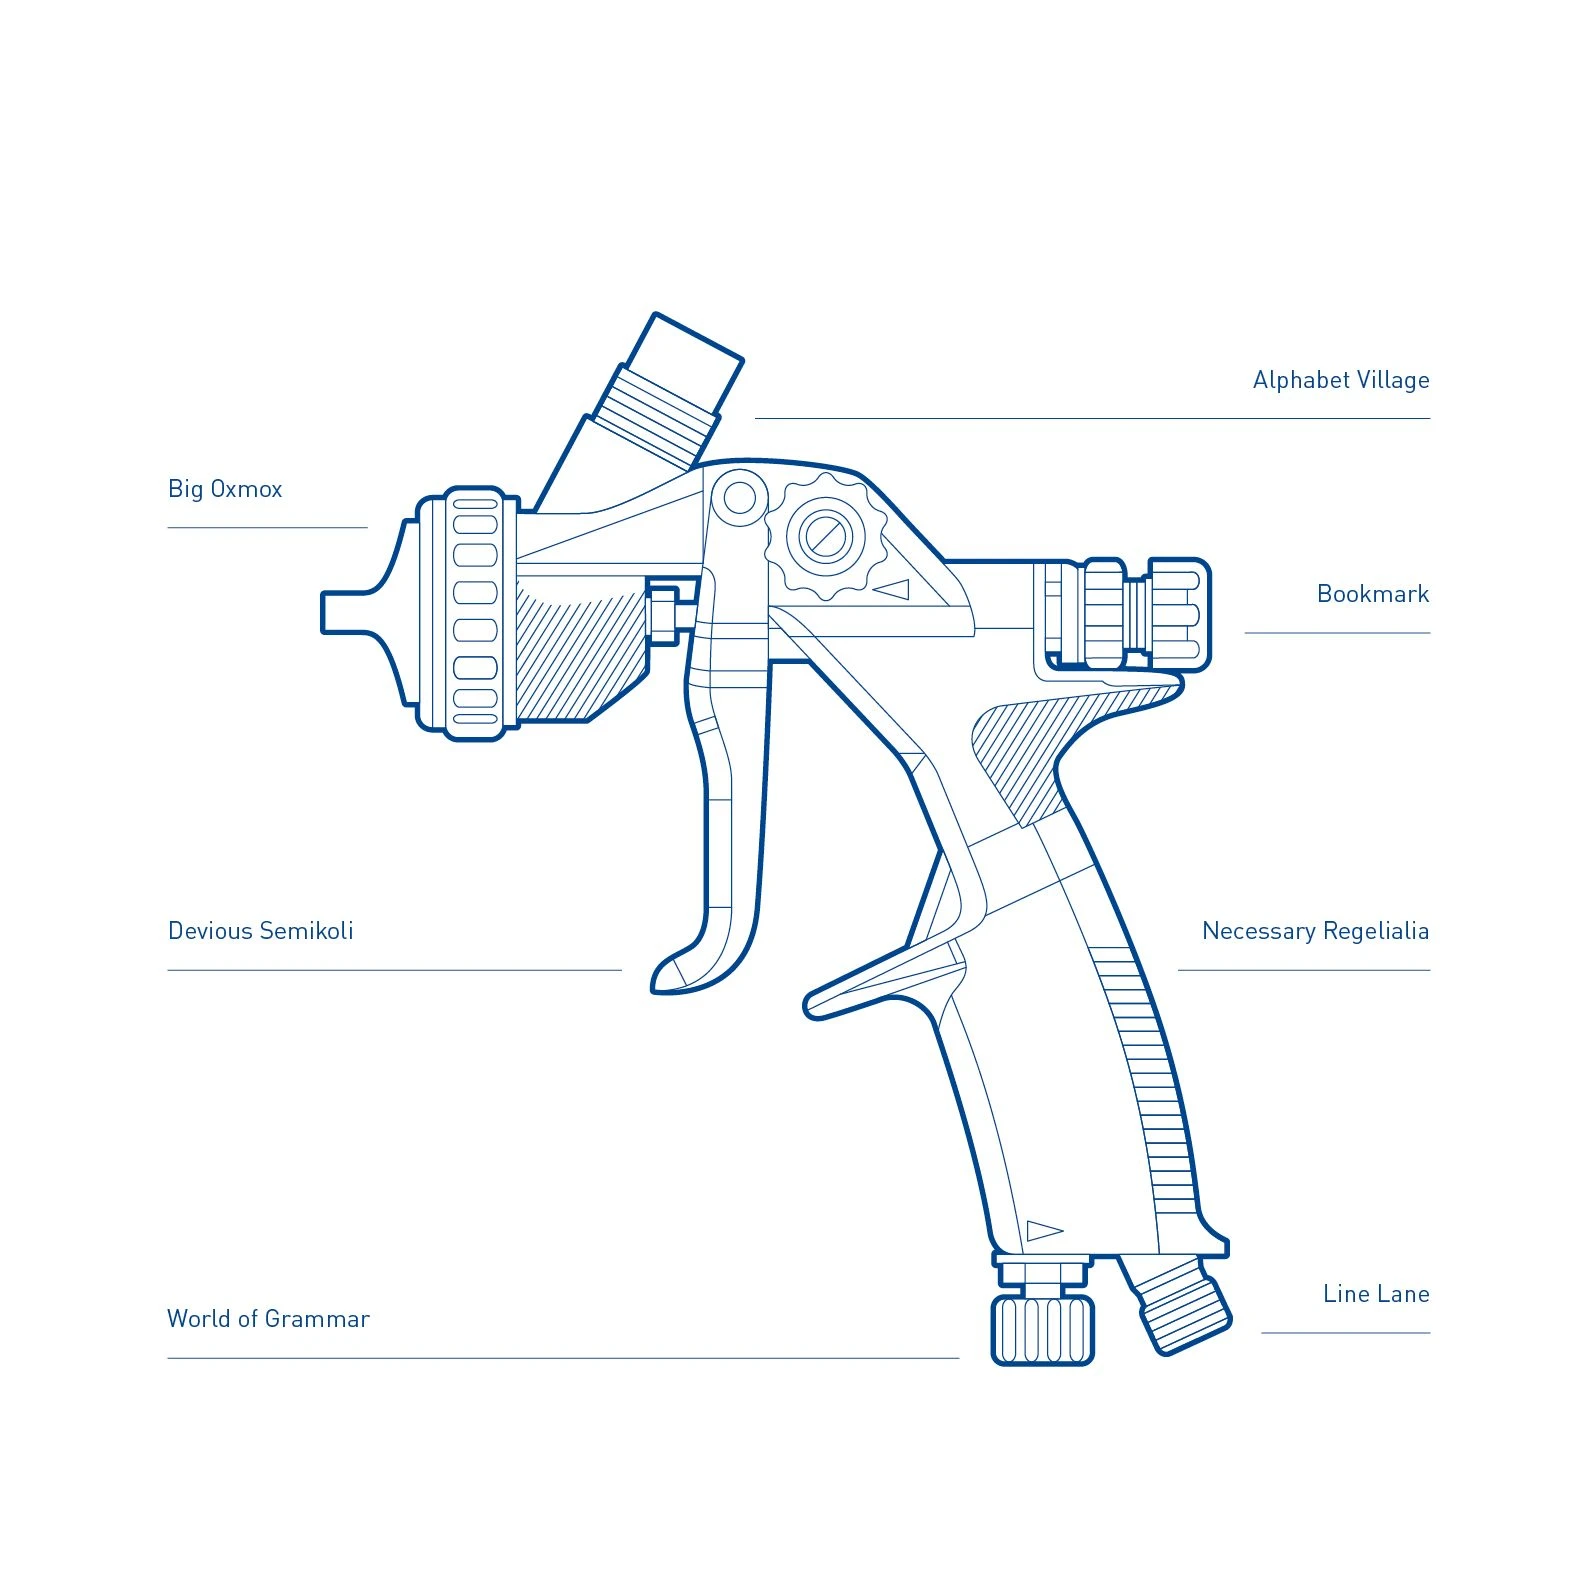 Direct labeling of spray gun graphic for infographics